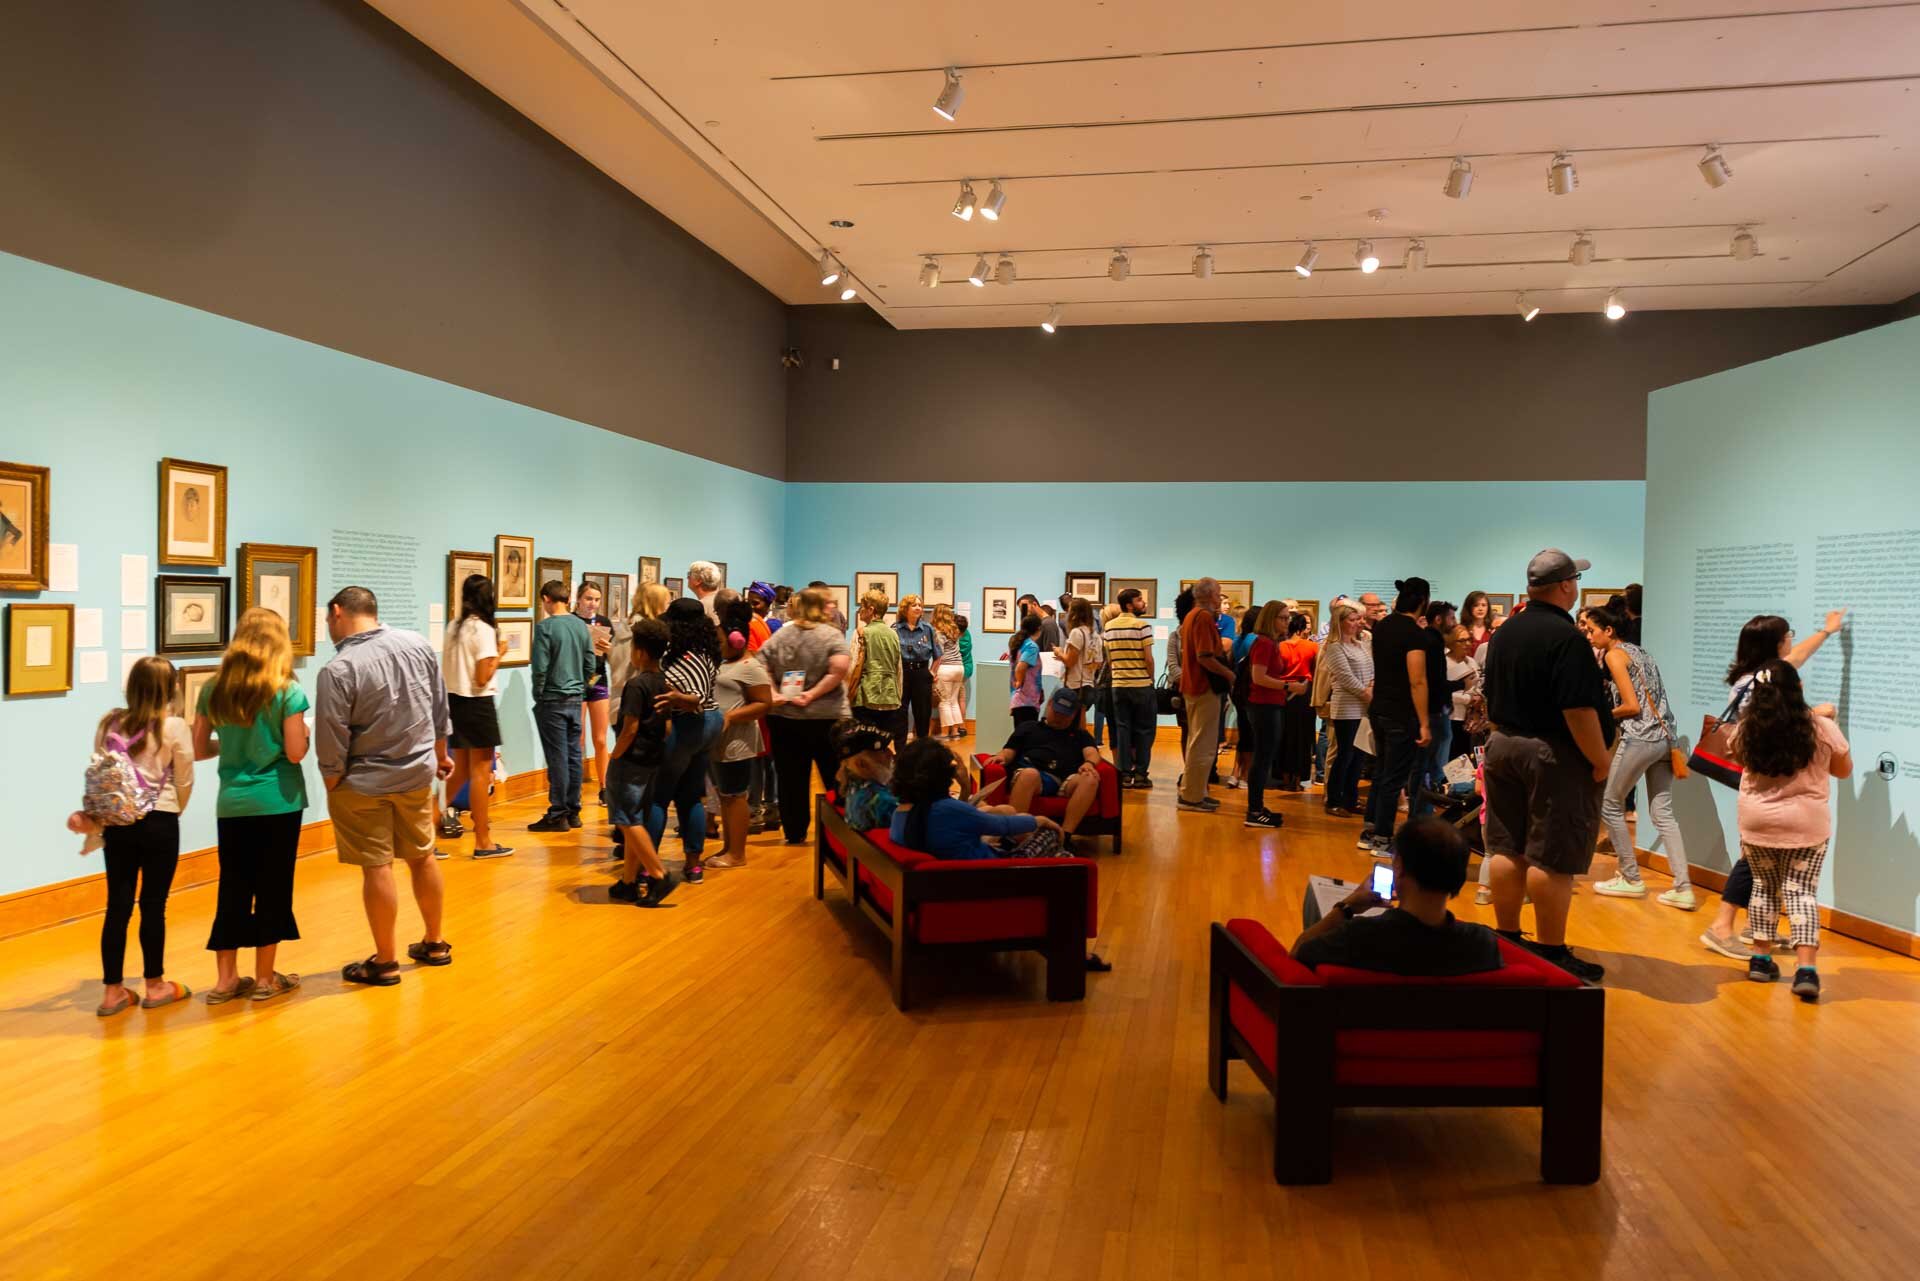  We hope to see you in the galleries very soon! Admission is always free, and we are happy to have served the Lakeland community and beyond for over 55 years!  